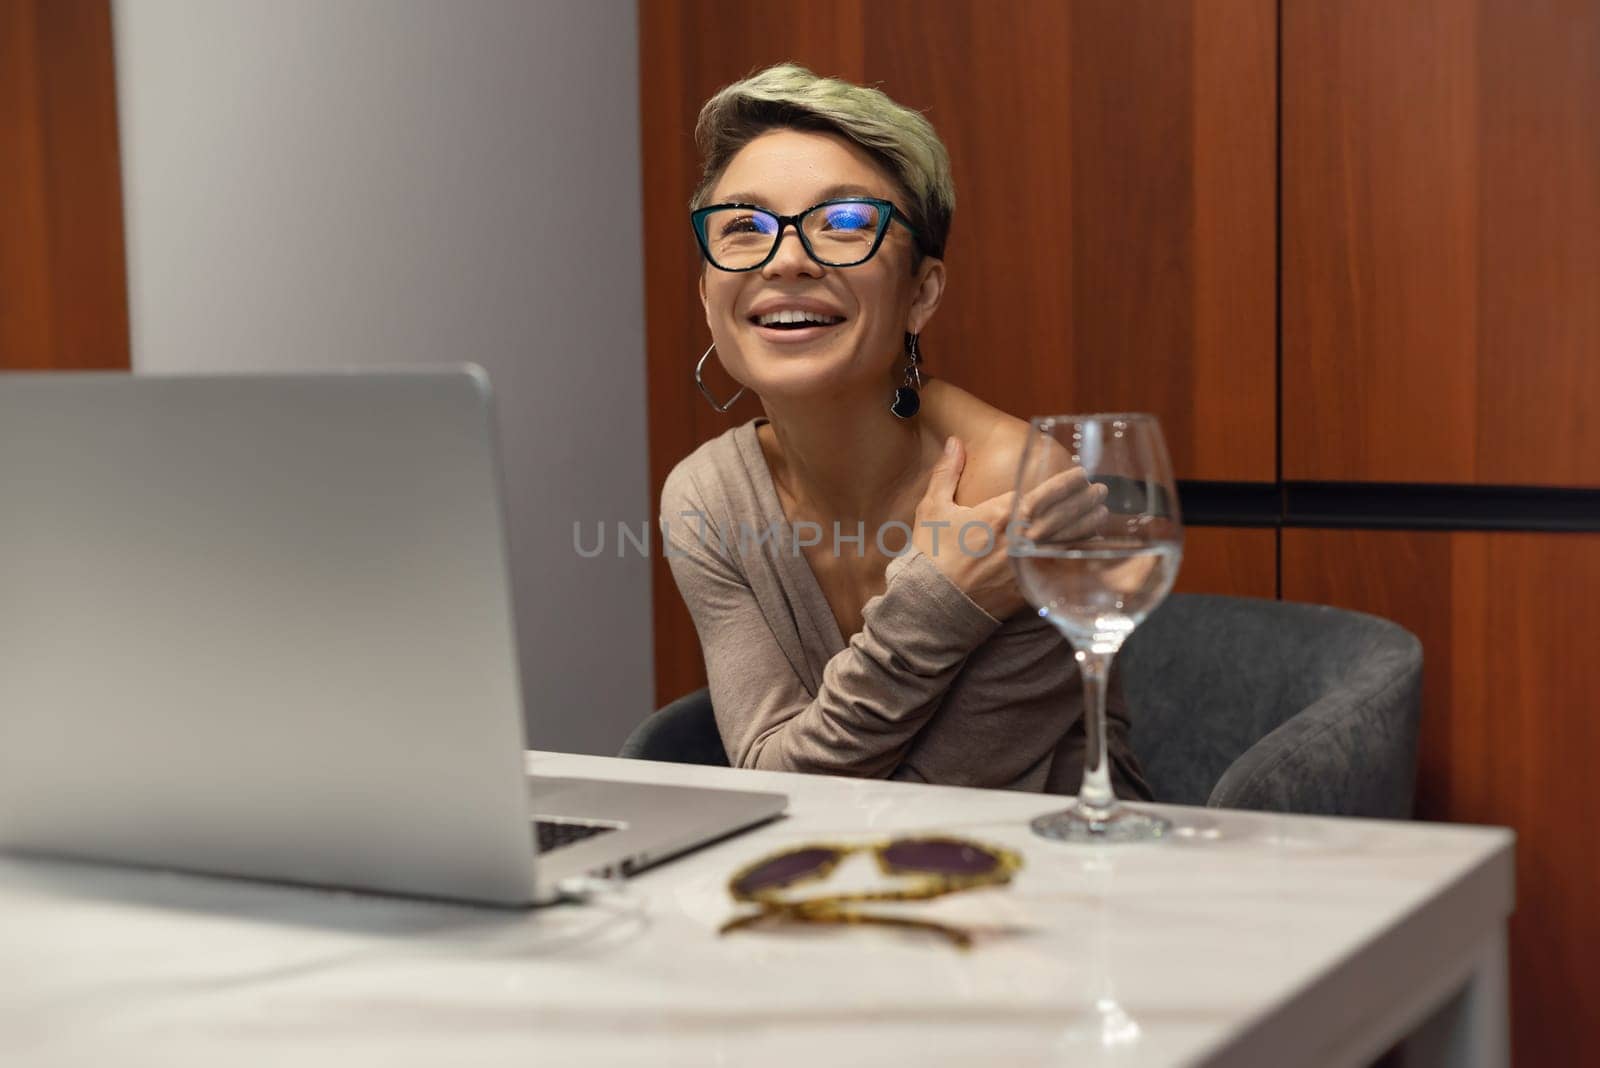 girl with short hair and glasses indoors at a laptop laughs and smiles emotionally and cheerfully while working and chatting